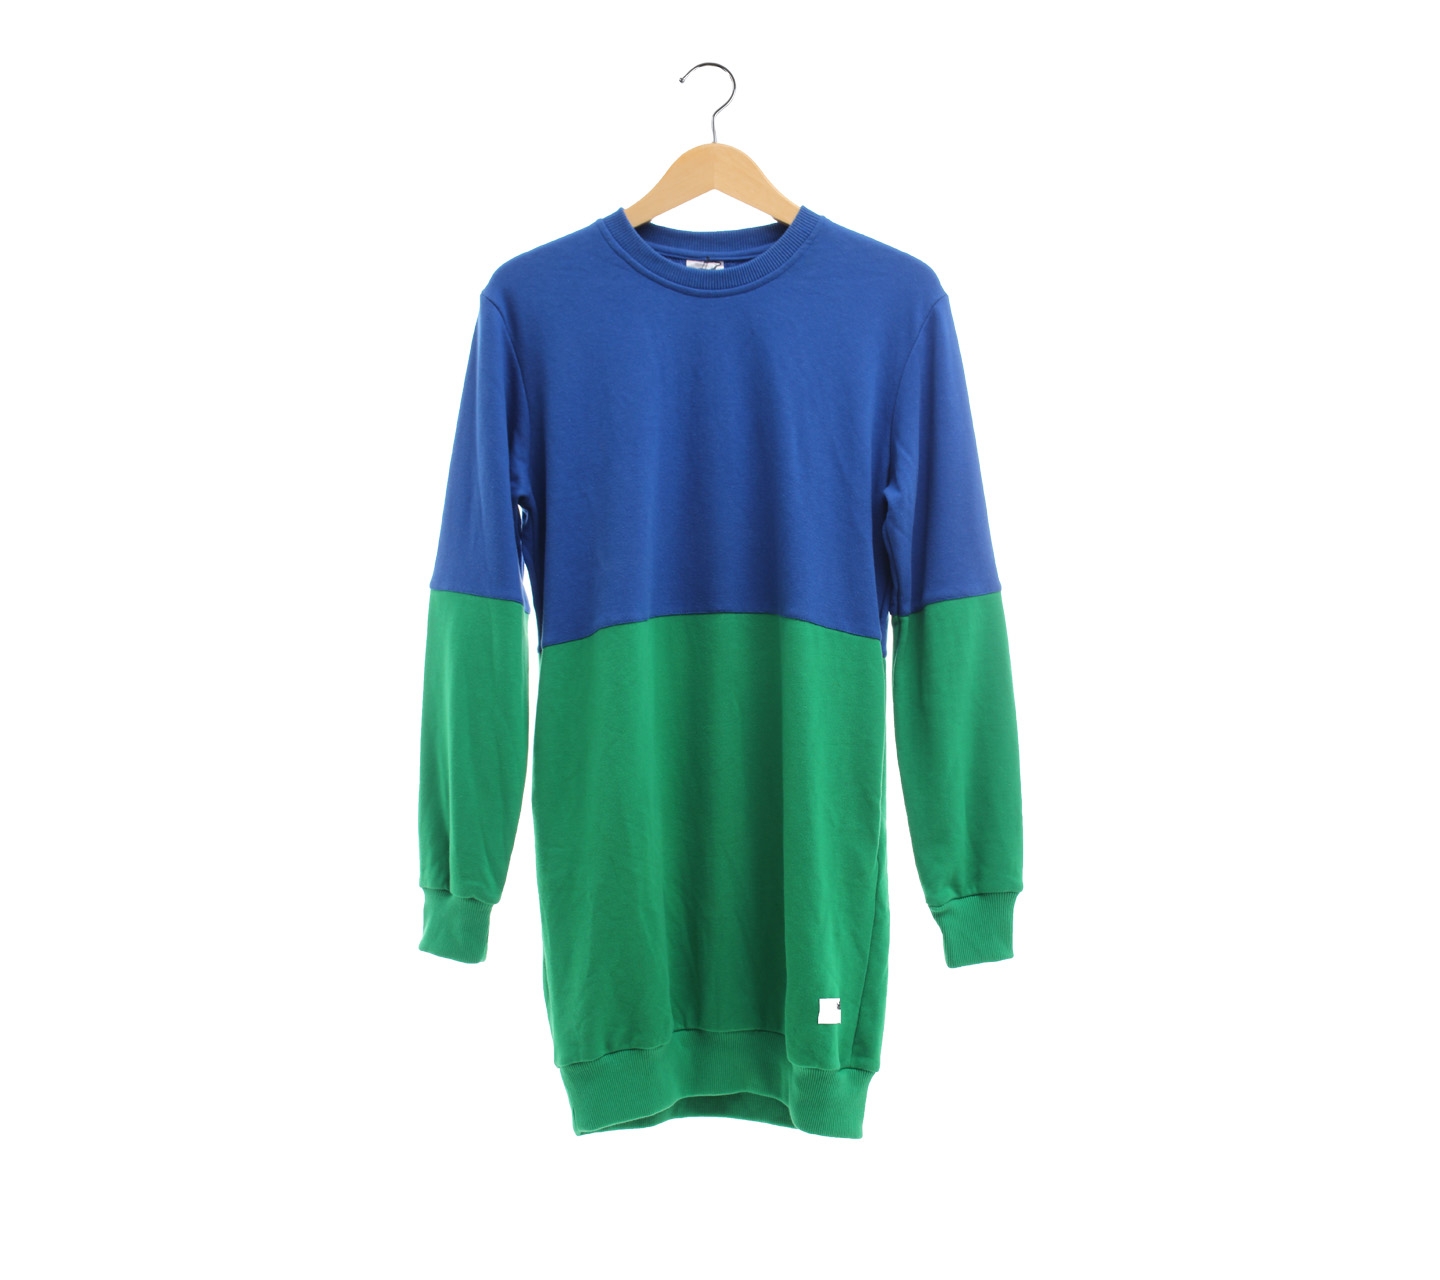 Douche Blue and Green Knit Long Sweater